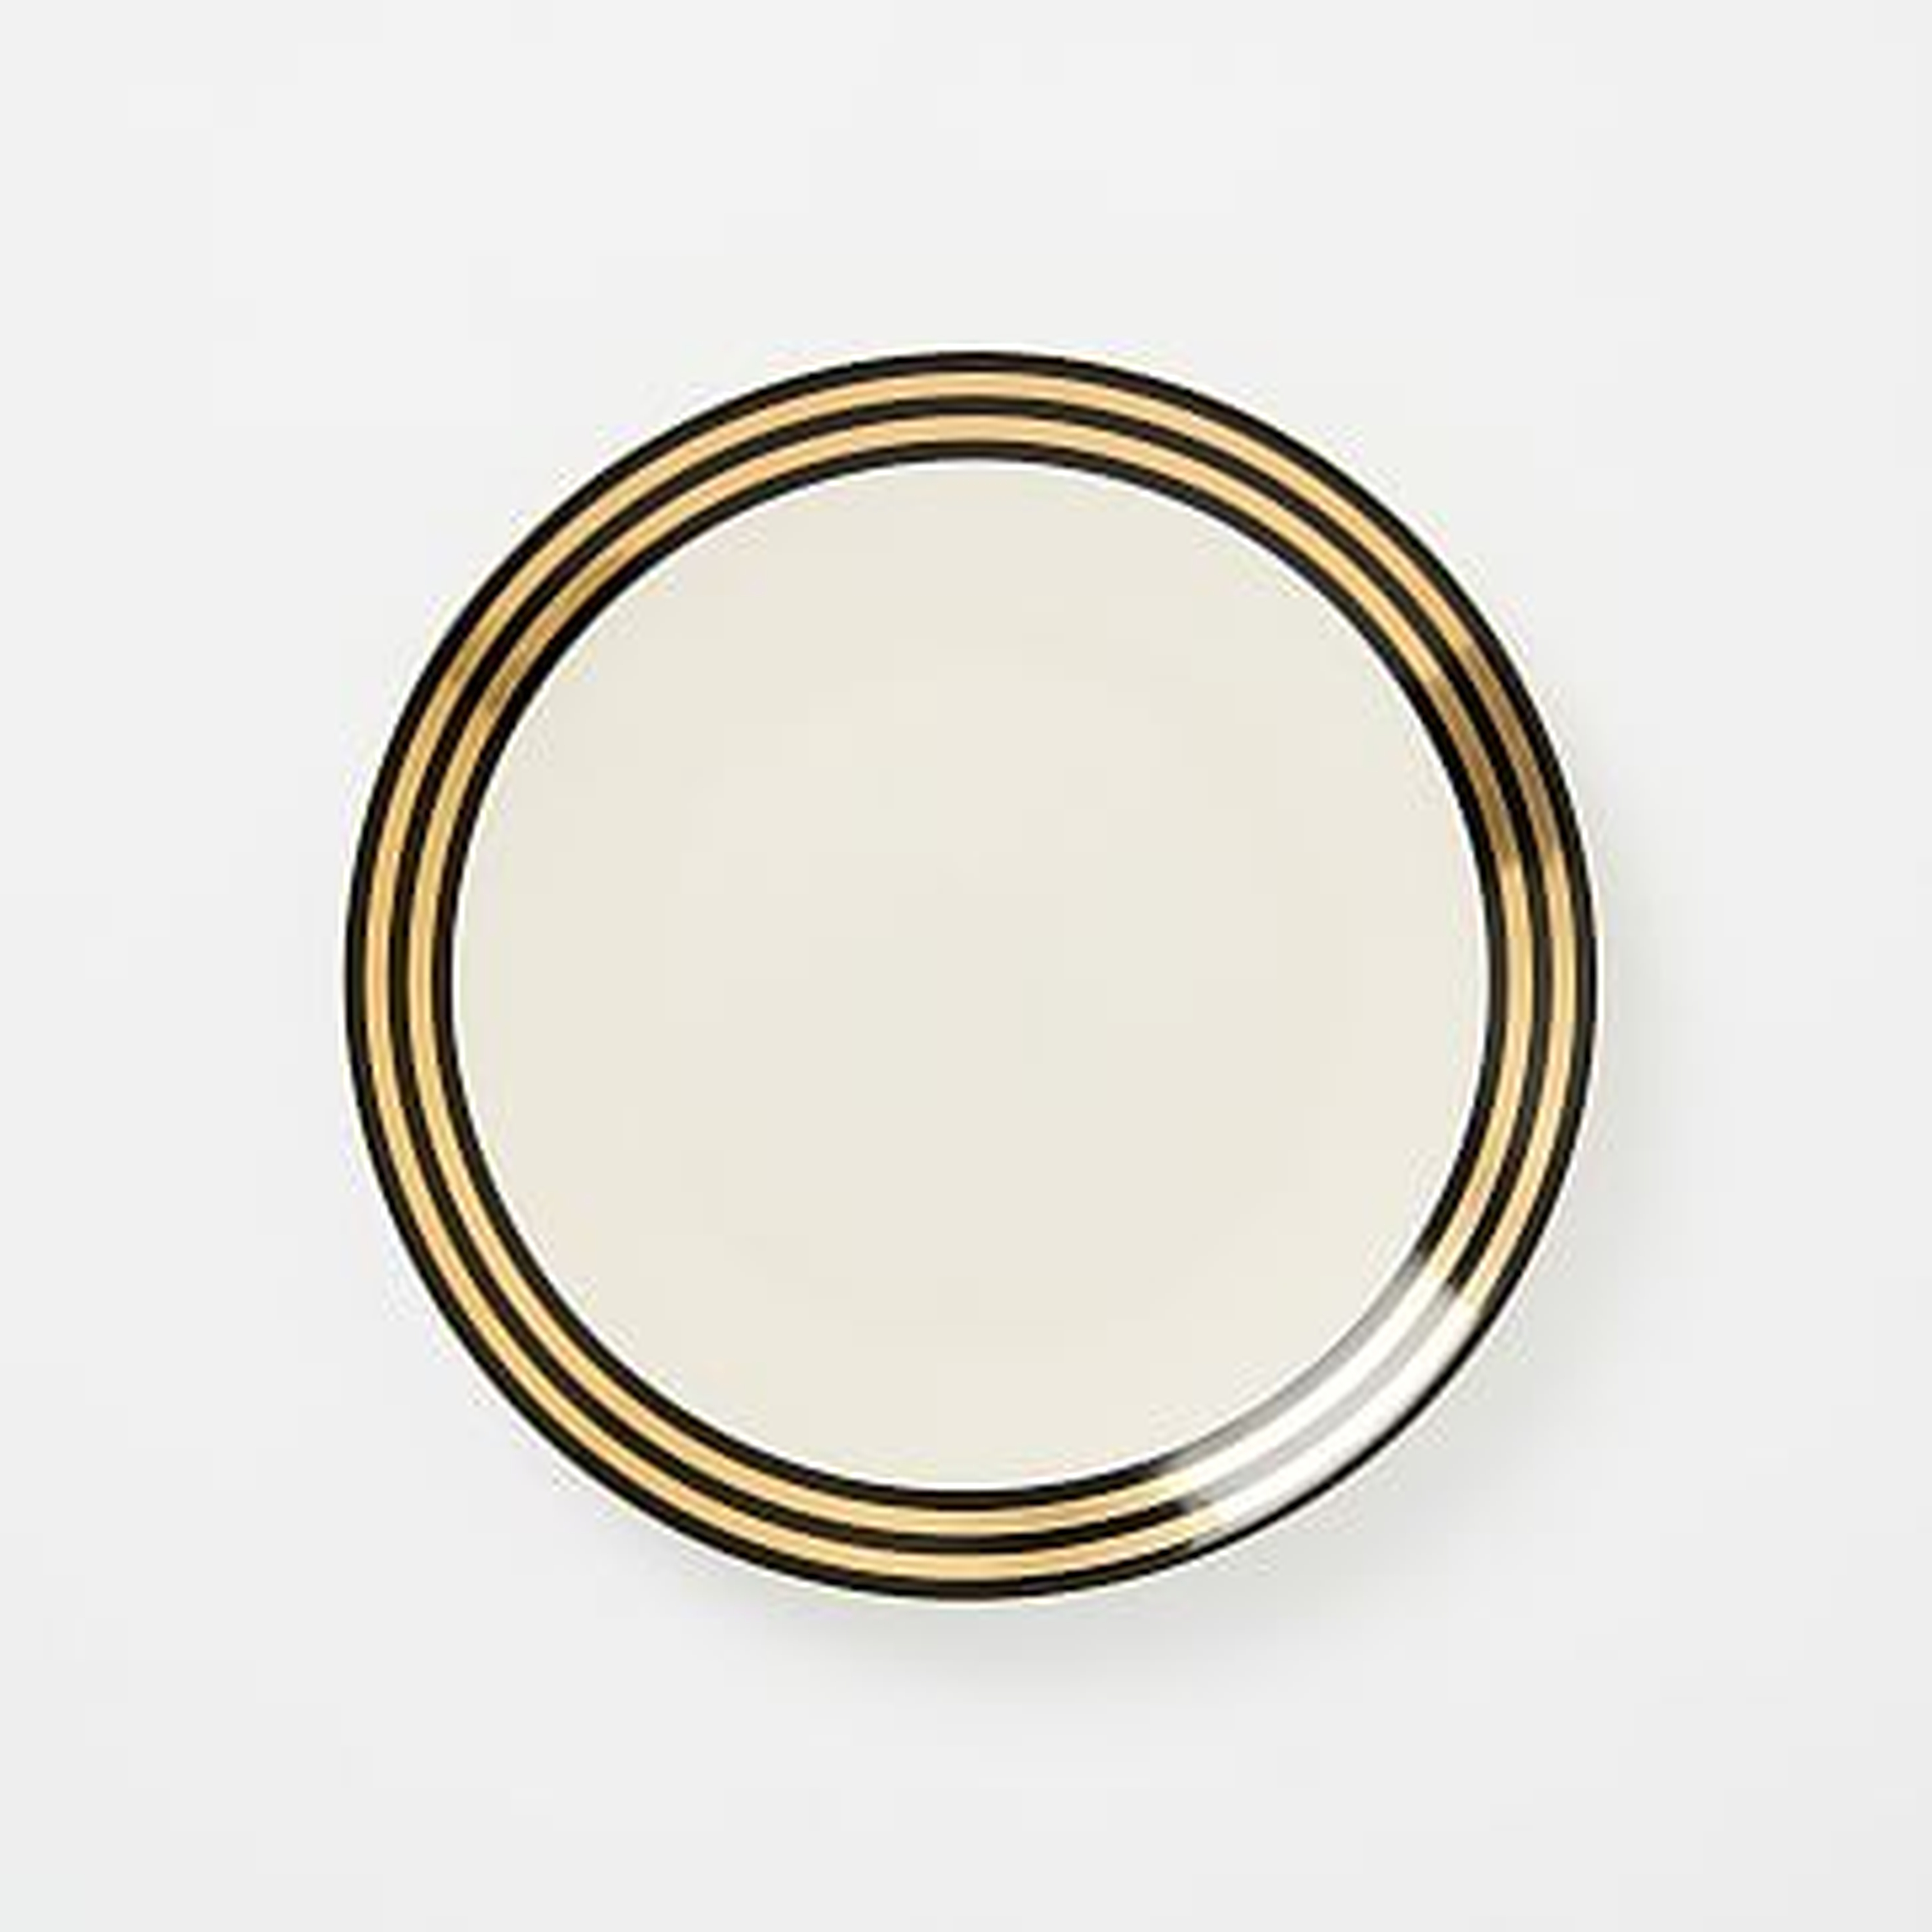 Fishs Eddy Side Plate, Black + Gold Thick Striped Band, Set of 4 - West Elm